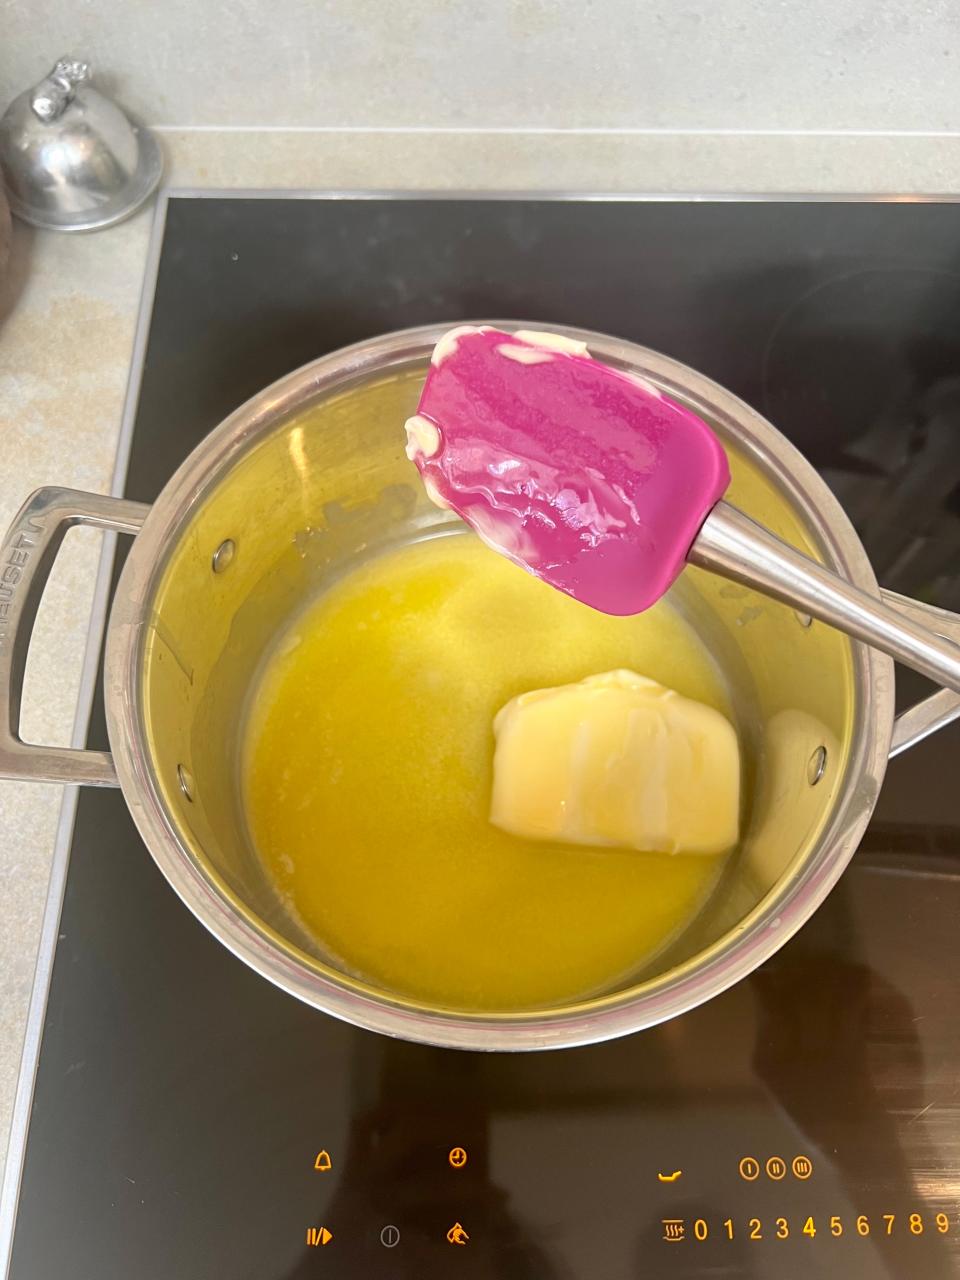 A saucepan of melted butter on the stovetop.